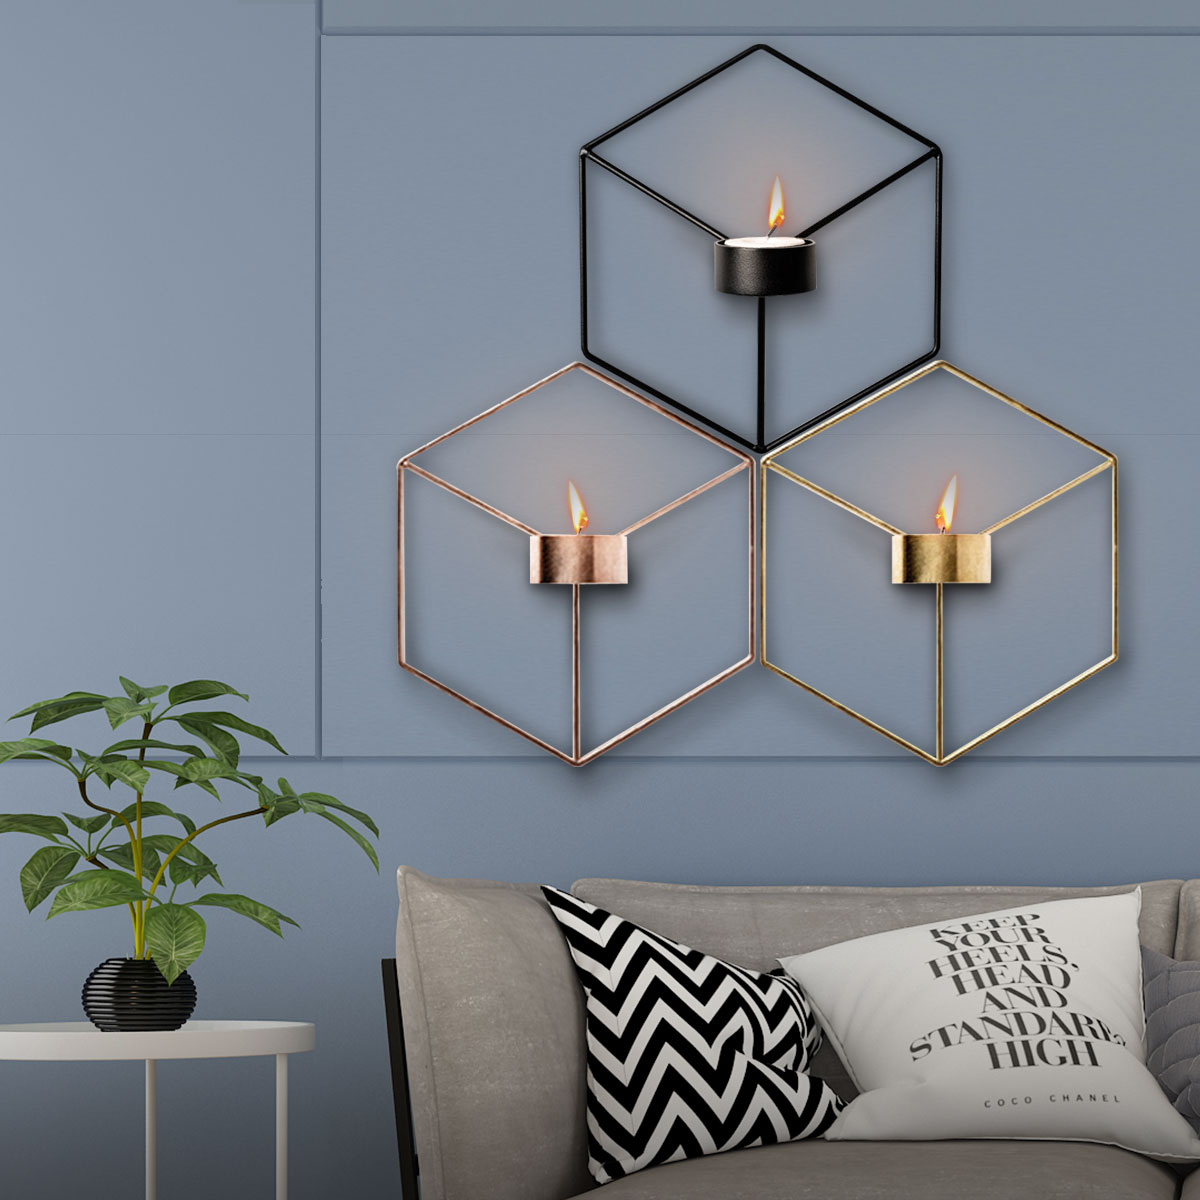 3D-Geometric-Nordic-Style-Candle-Holder-Iron-Candlestick-Handmade-Wall-Art-Room-Home-Decor-1390551